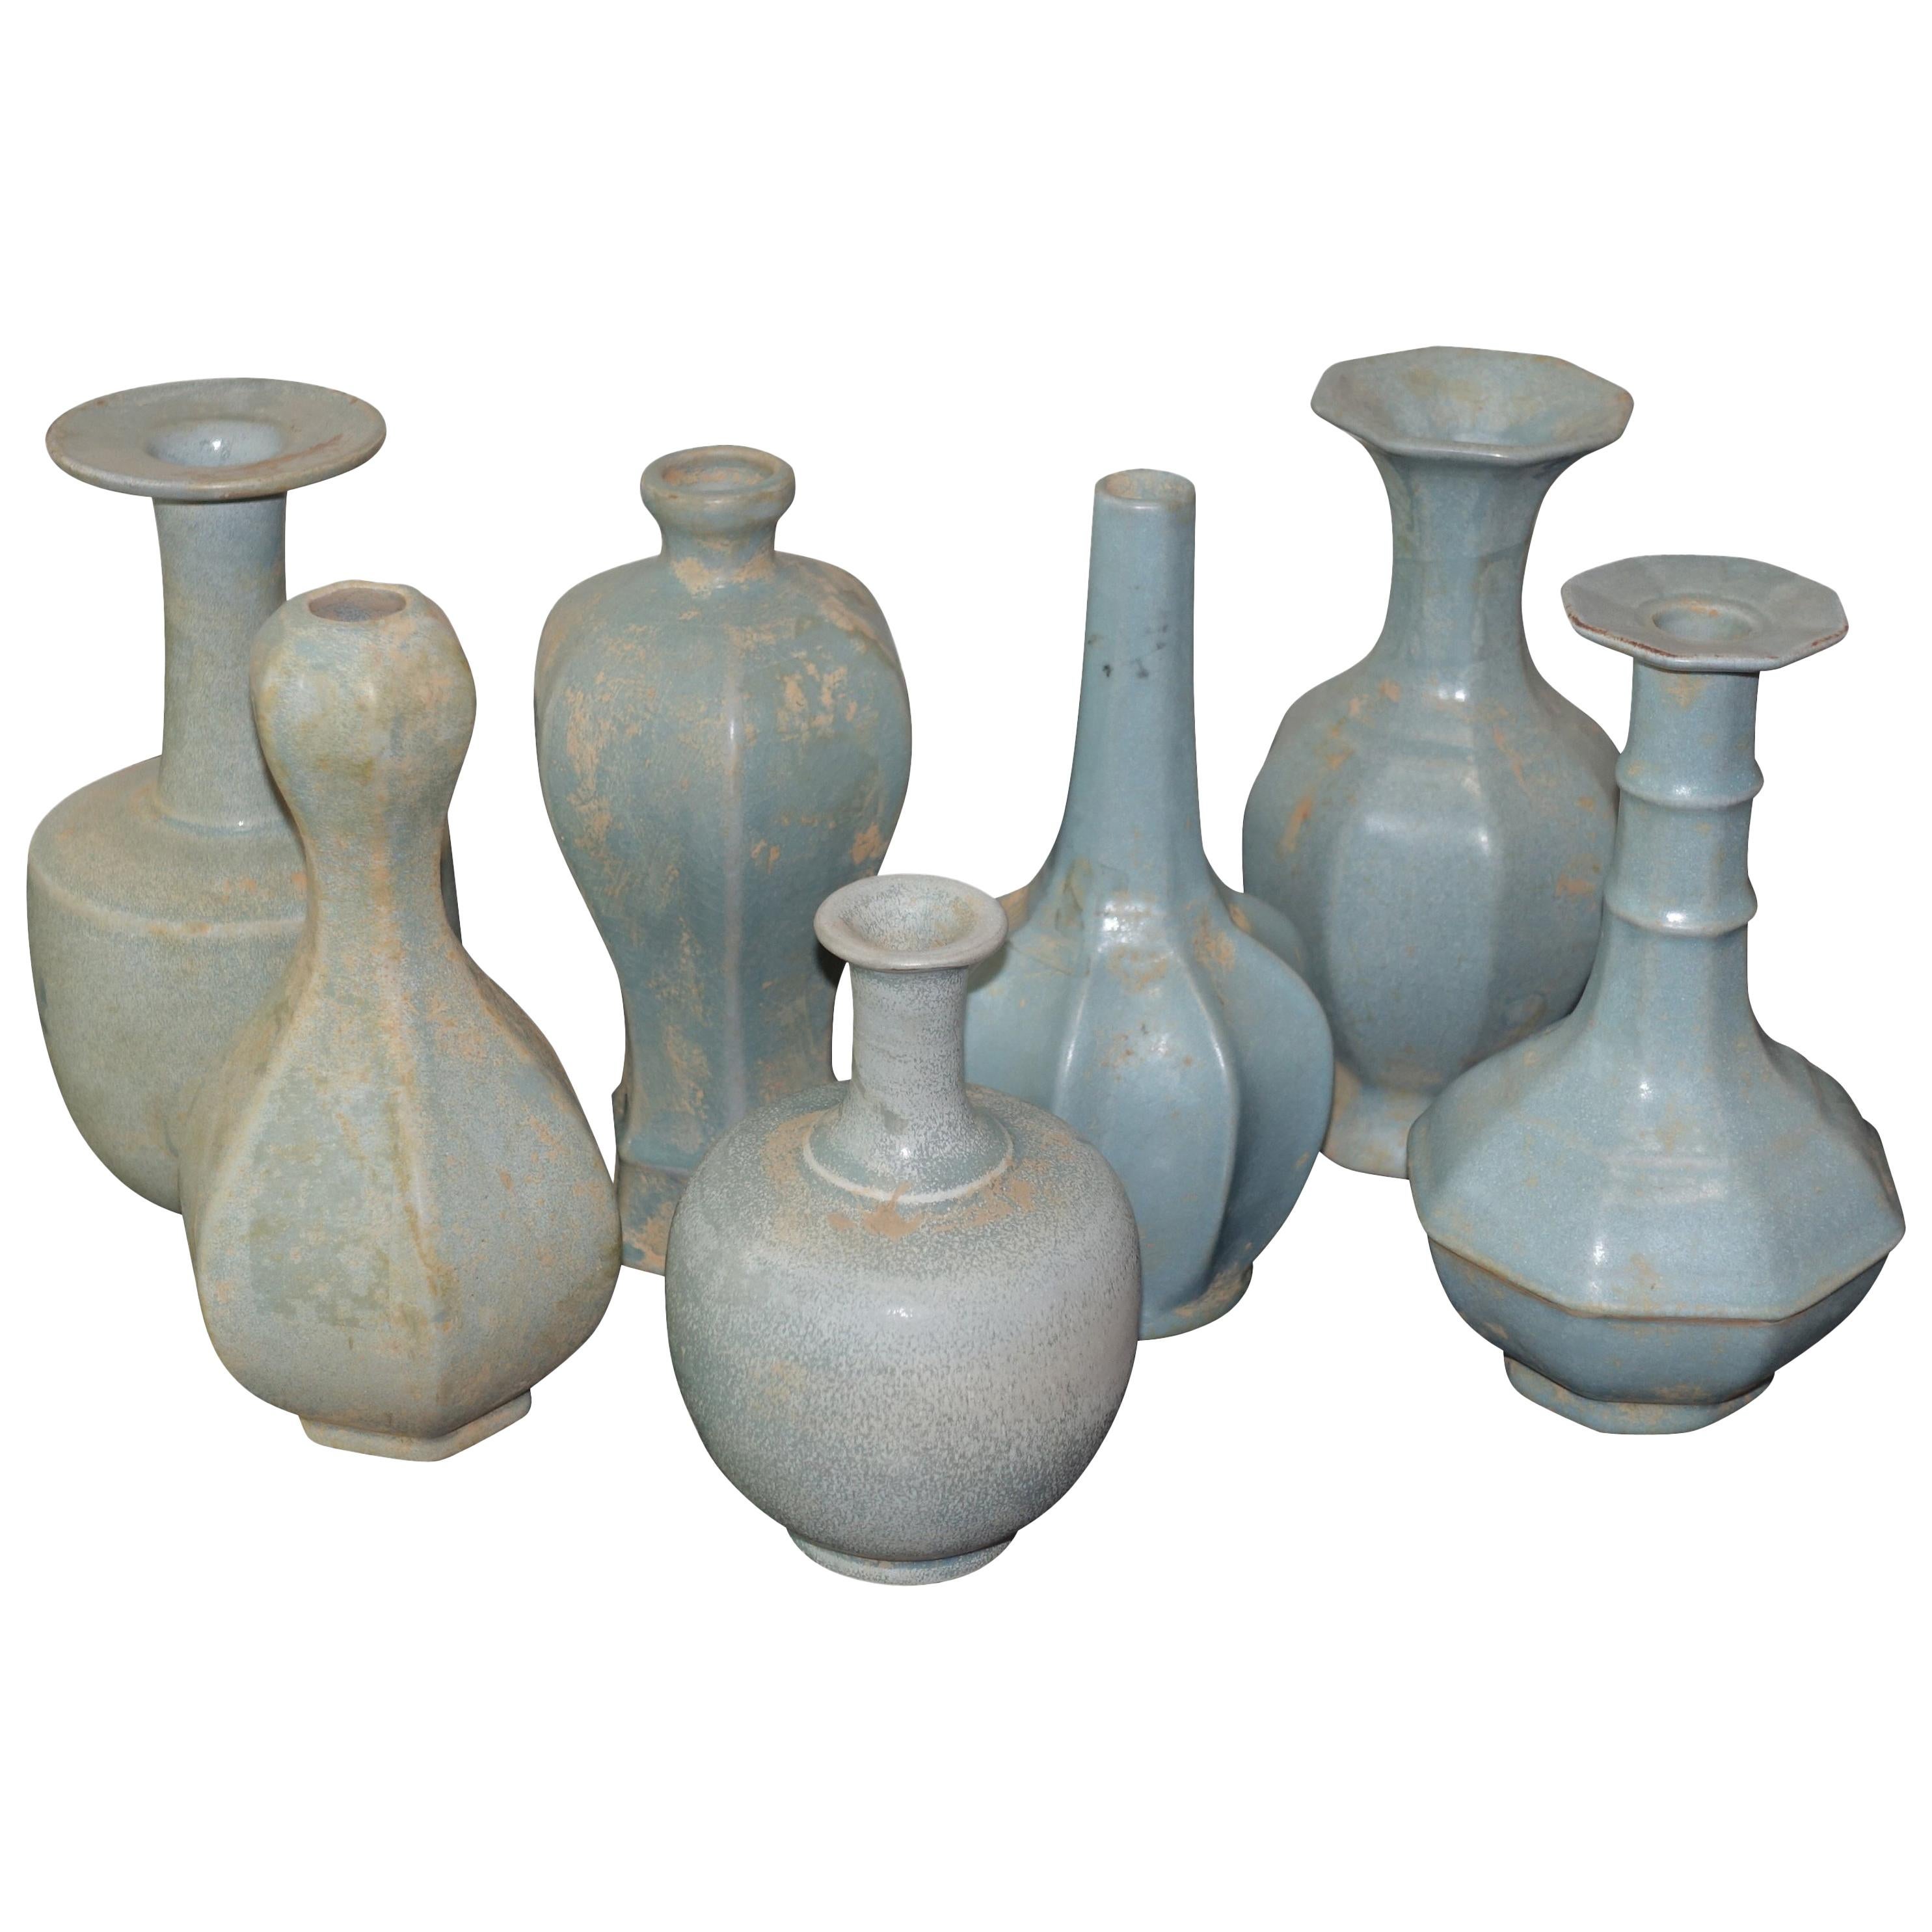 Collection Matte Glaze Pale Turquoise Vases, China, Contemporary